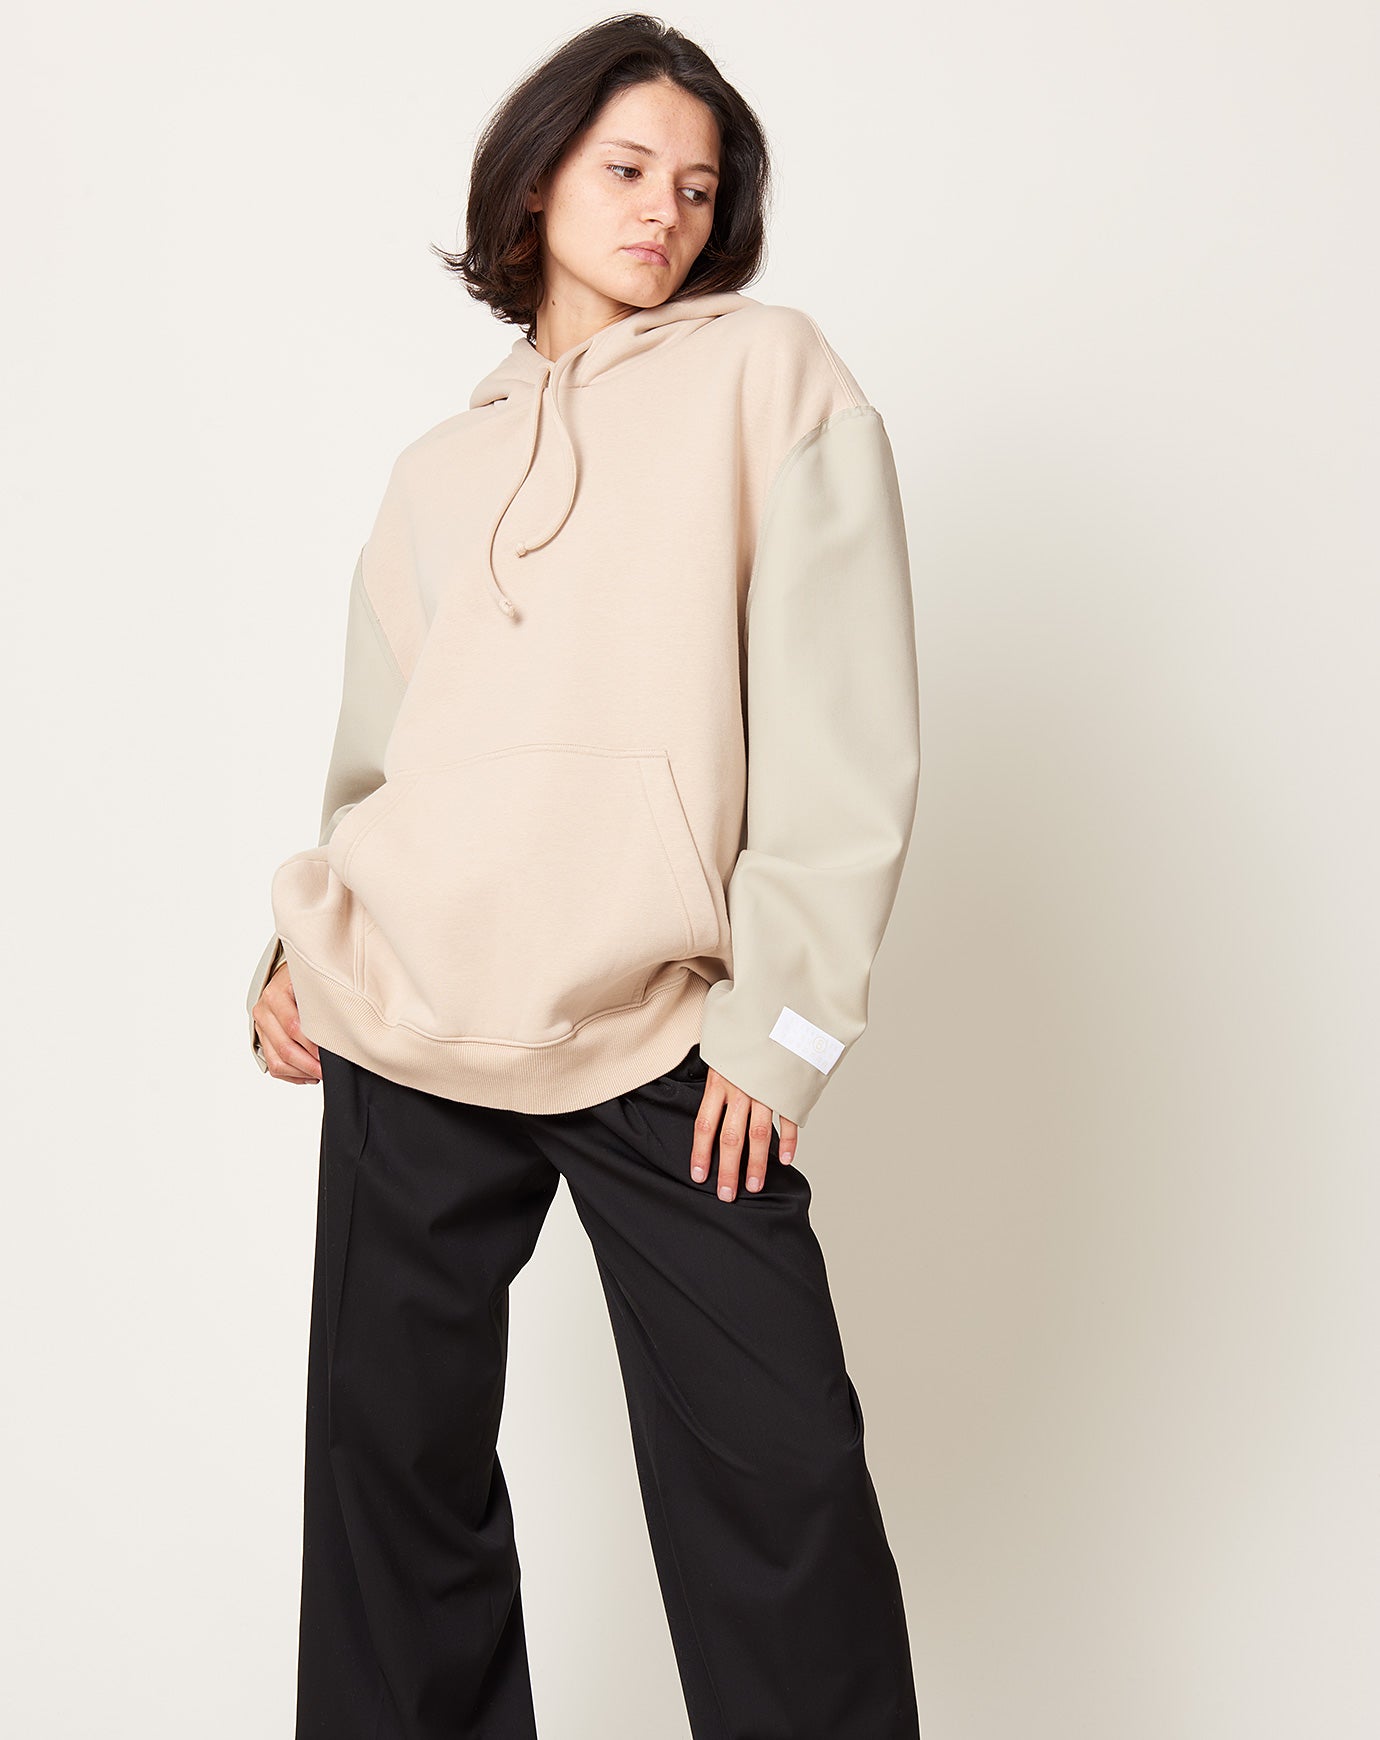 MM6 Sweatshirt with Suit Sleeves in Beige and Stone